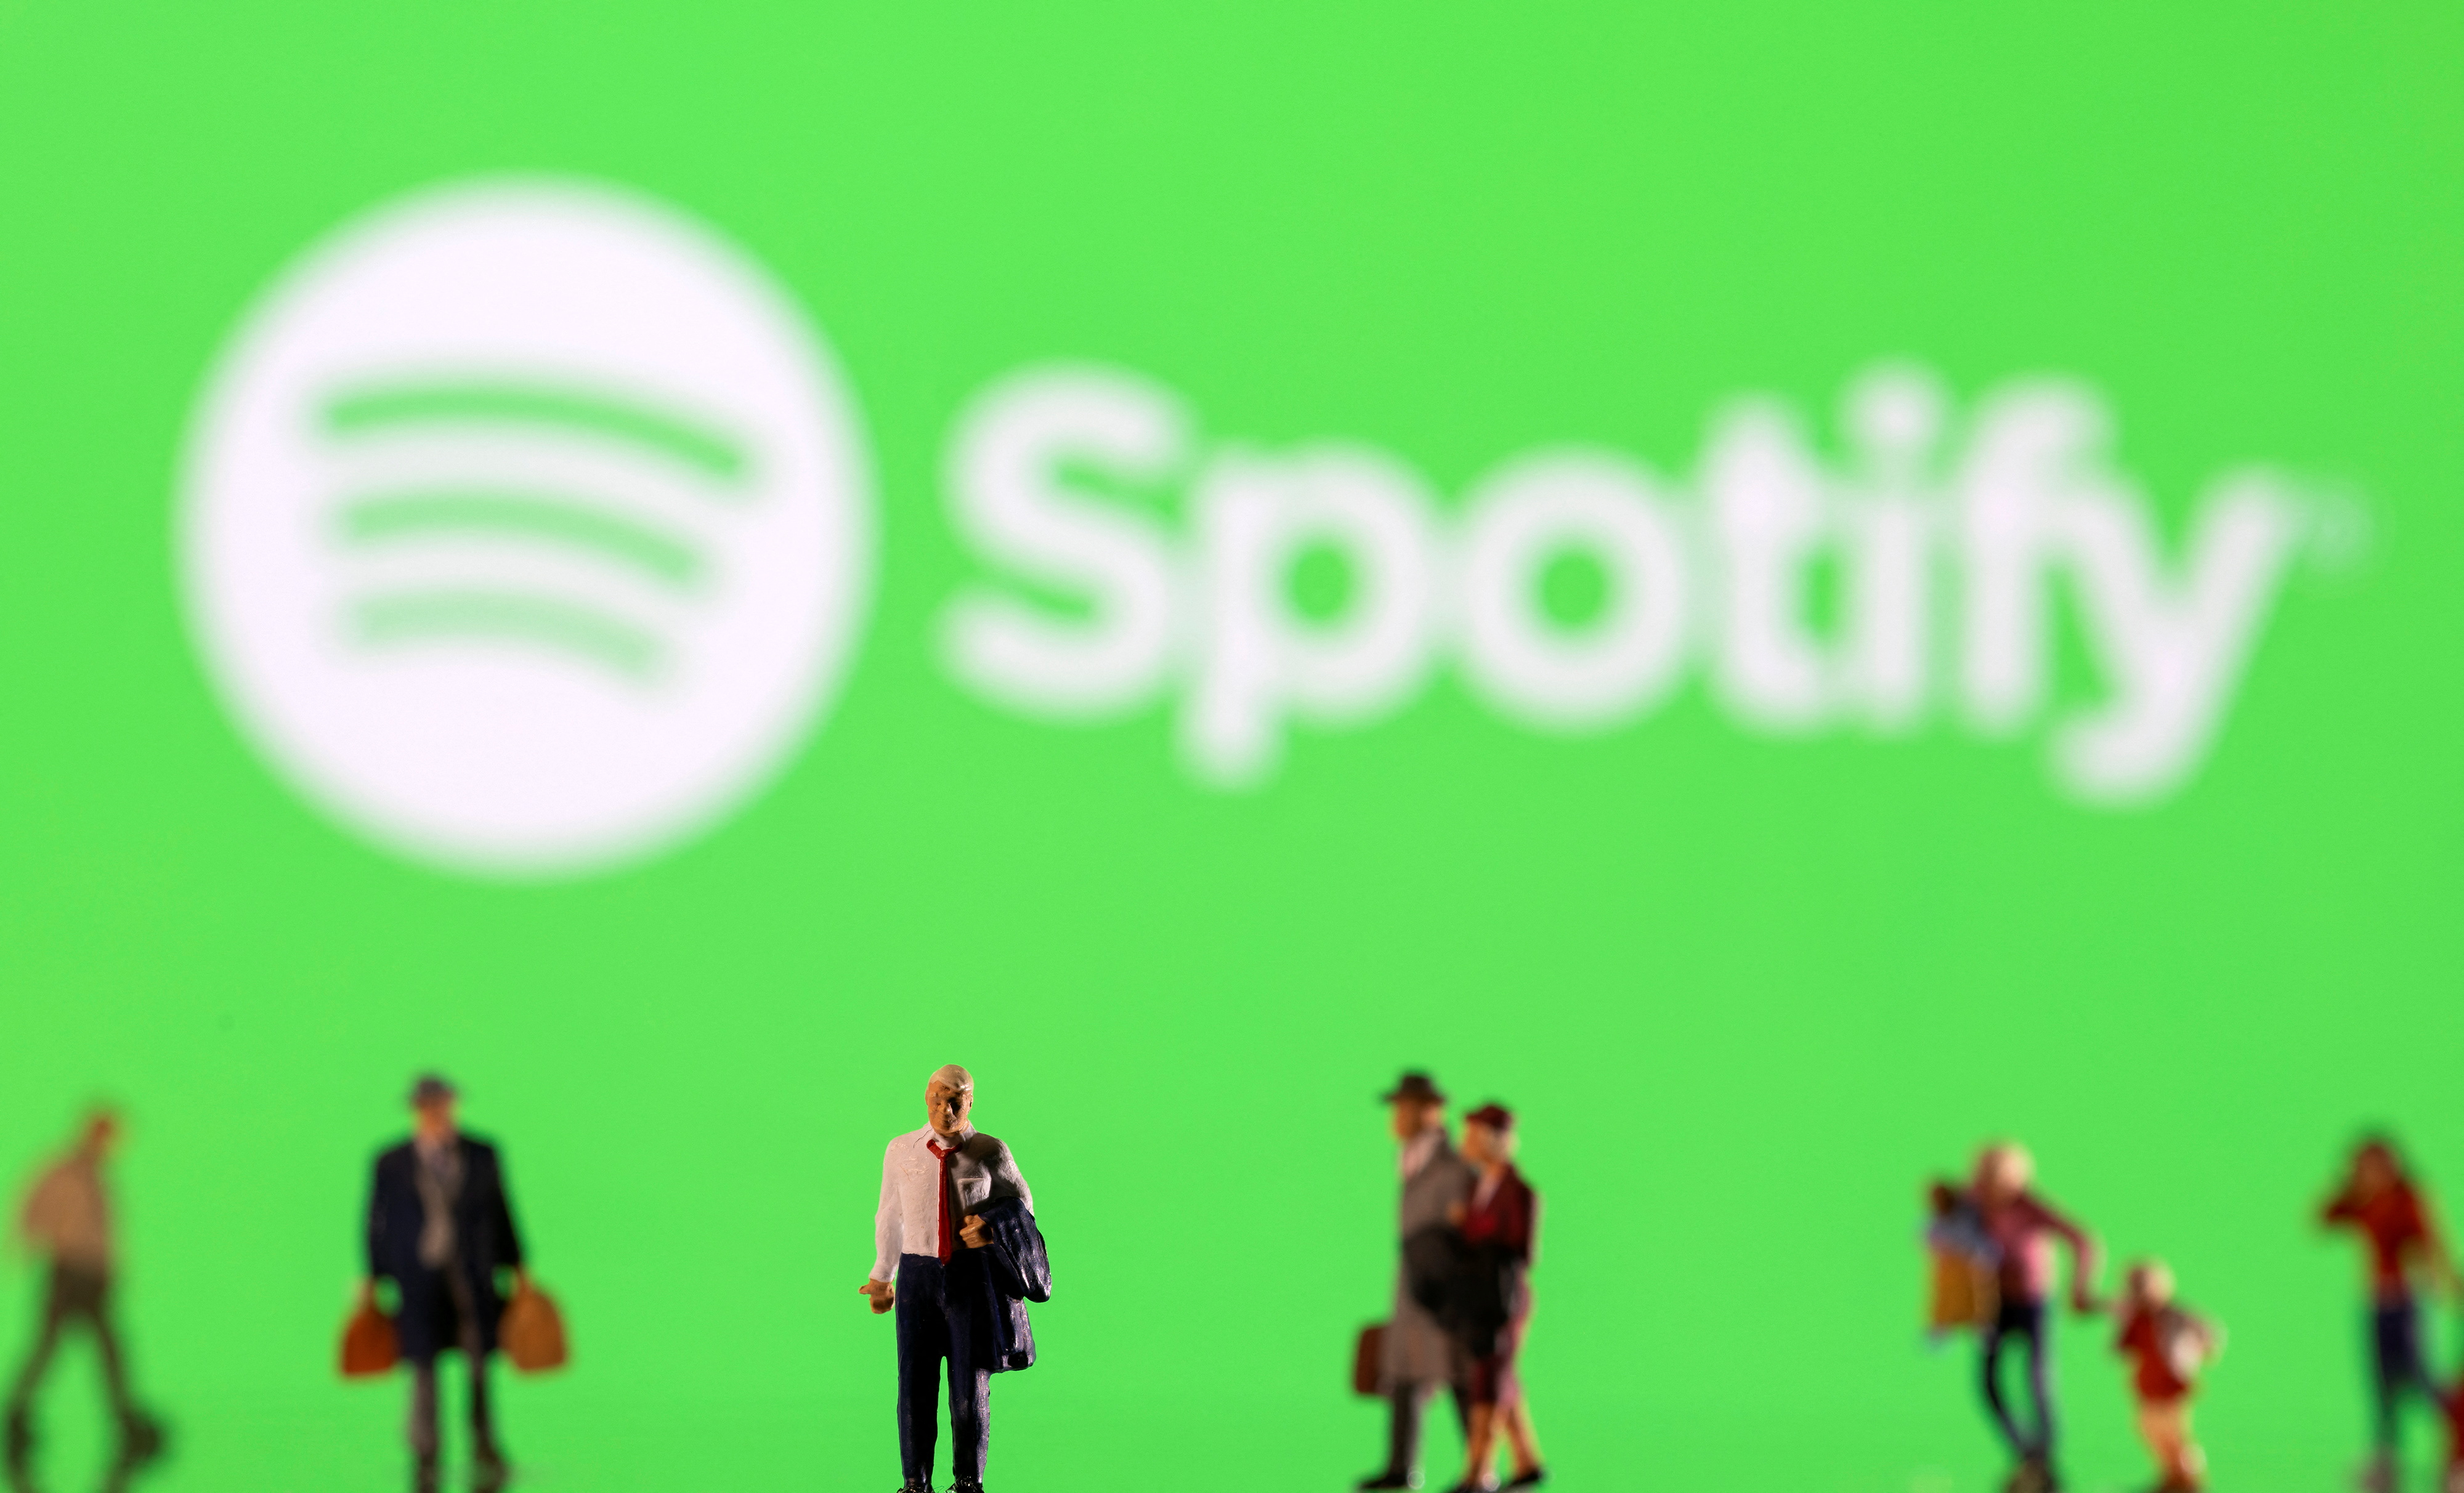 Illustration showing a small figure and the Spotify logo